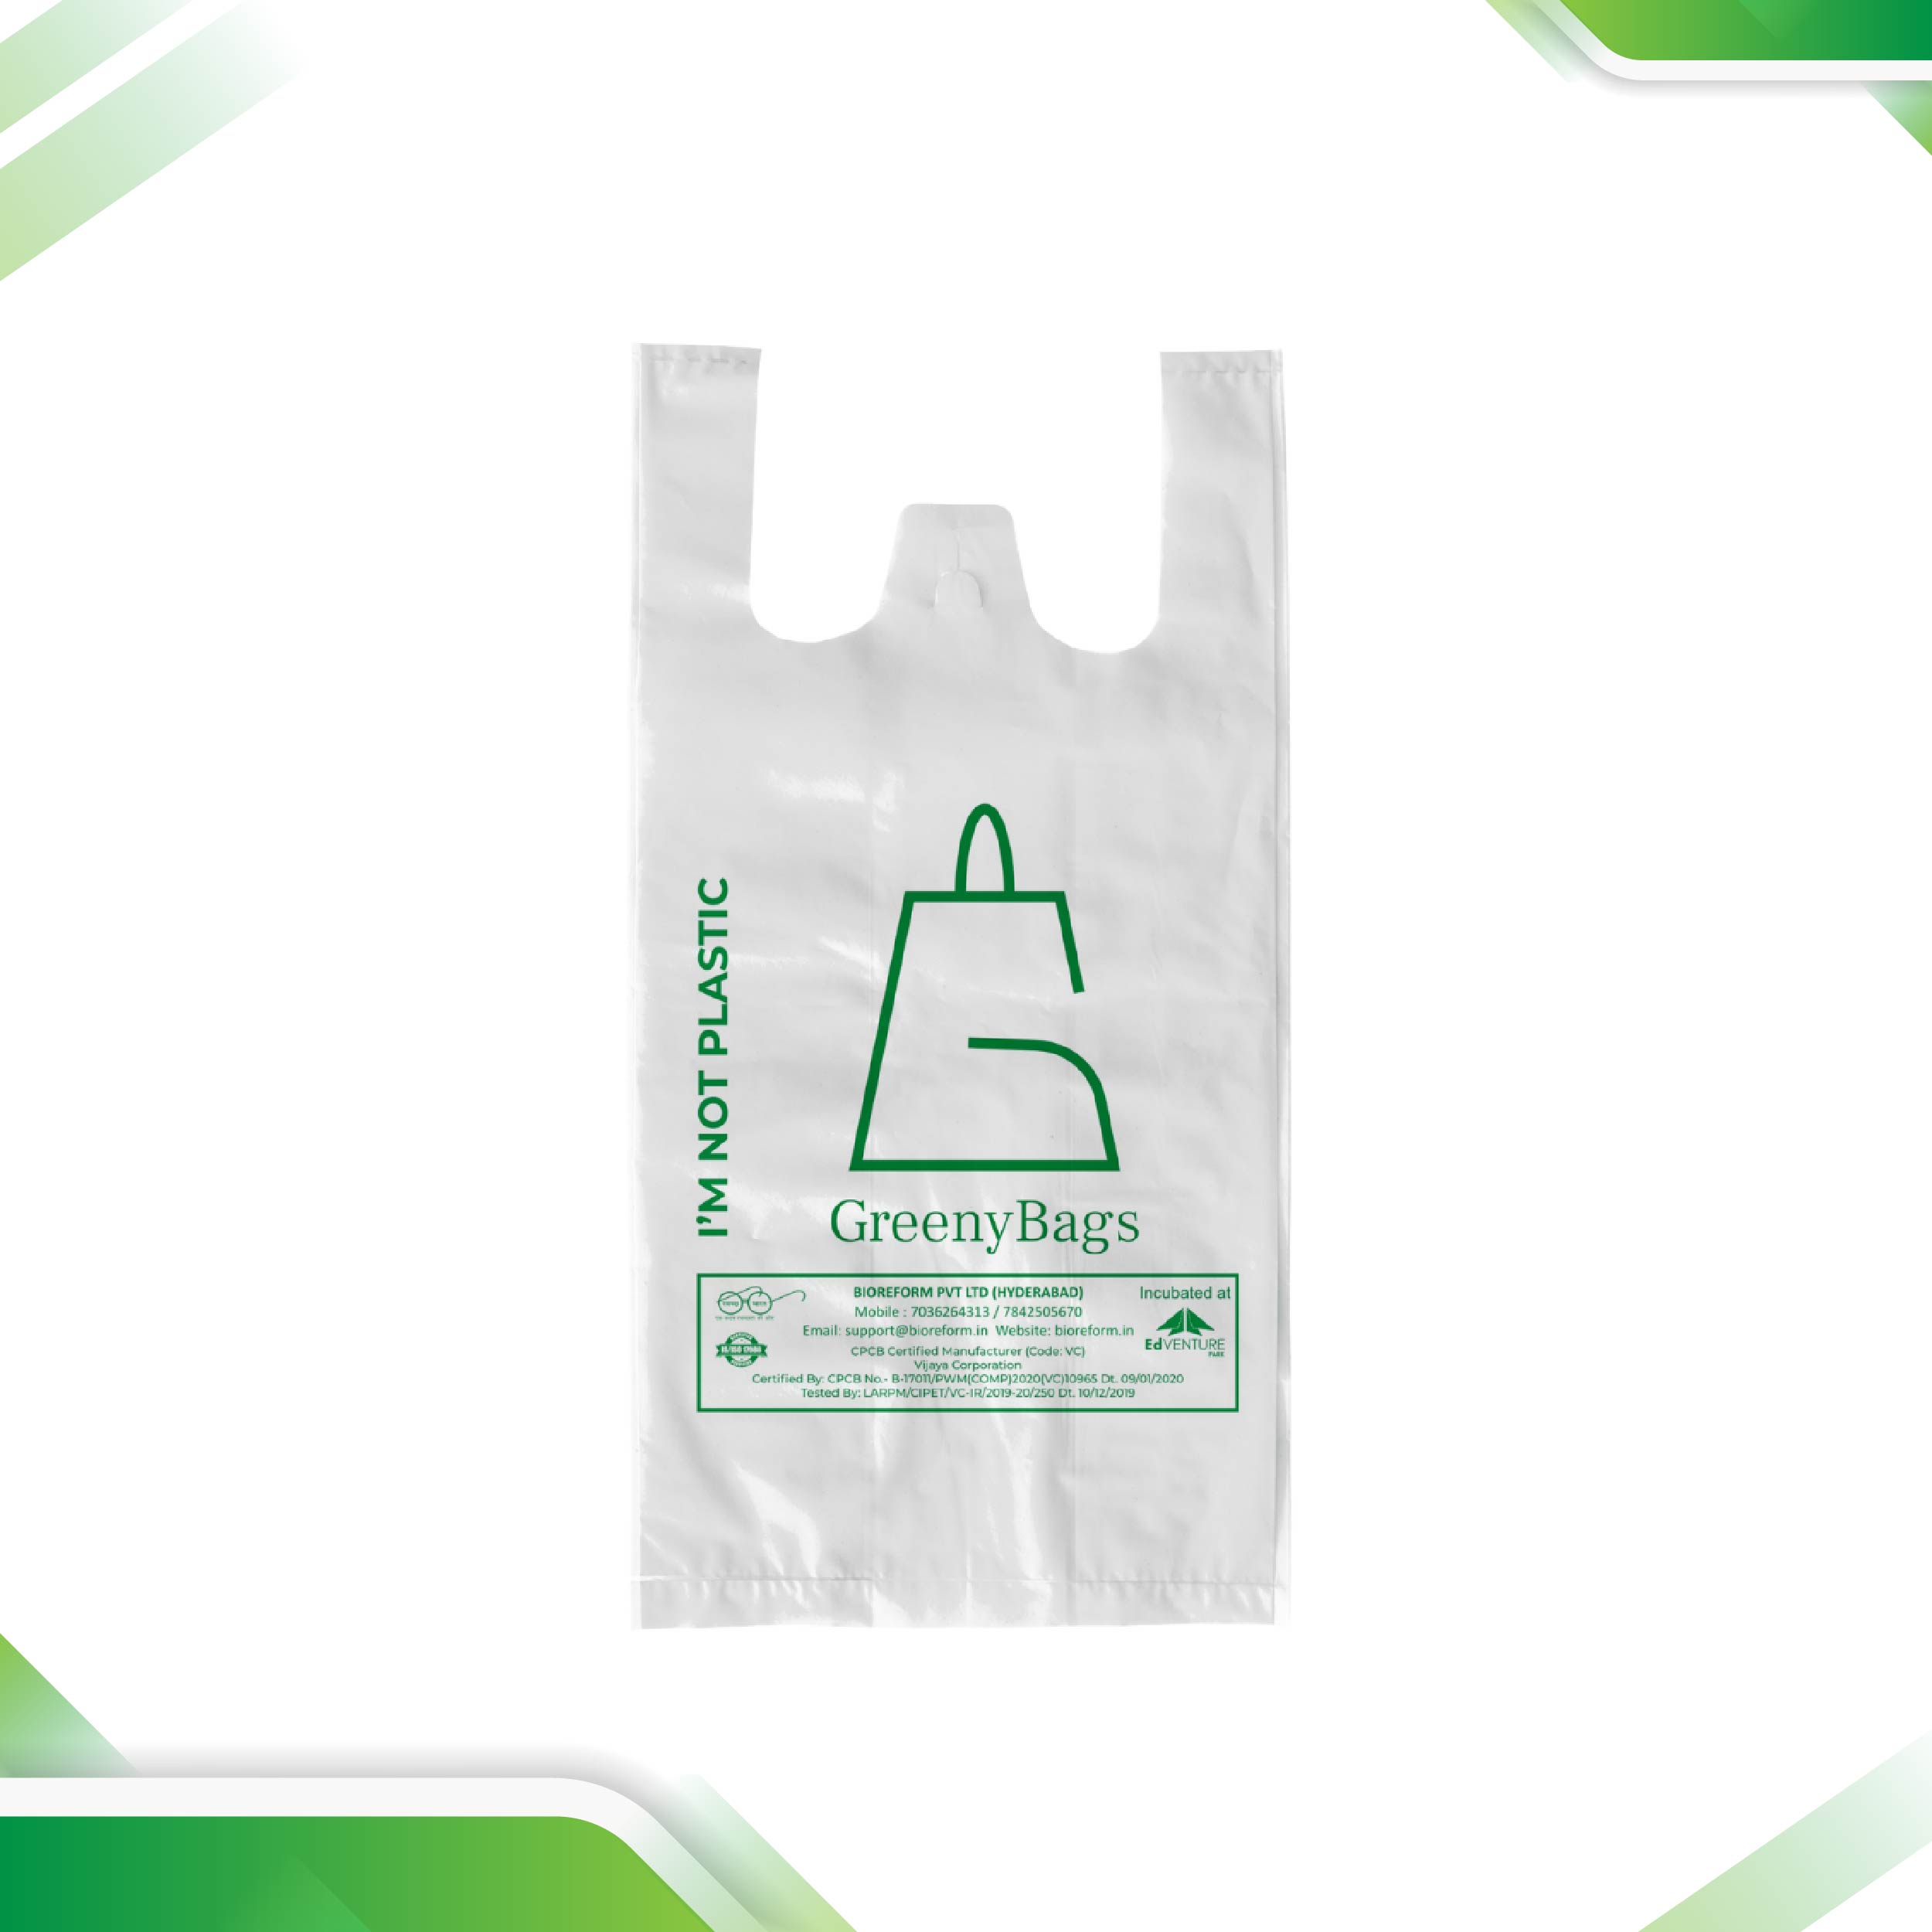 Sustainable W-cut carry bags crafted from compostable materials, ideal for eco-conscious consumers.